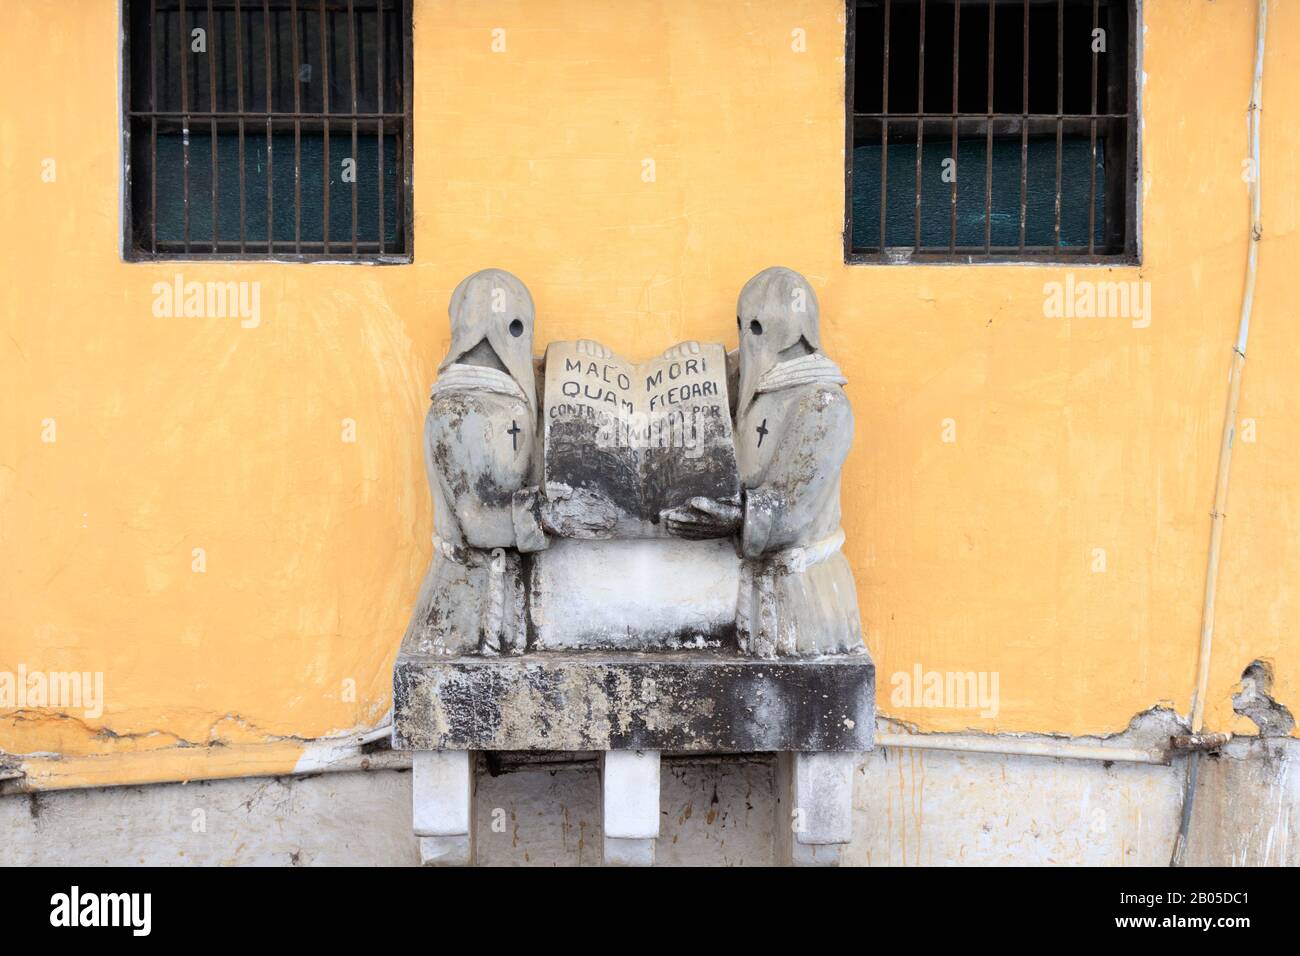 sculpture in the entrance of the city of antigua guatemala Stock Photo